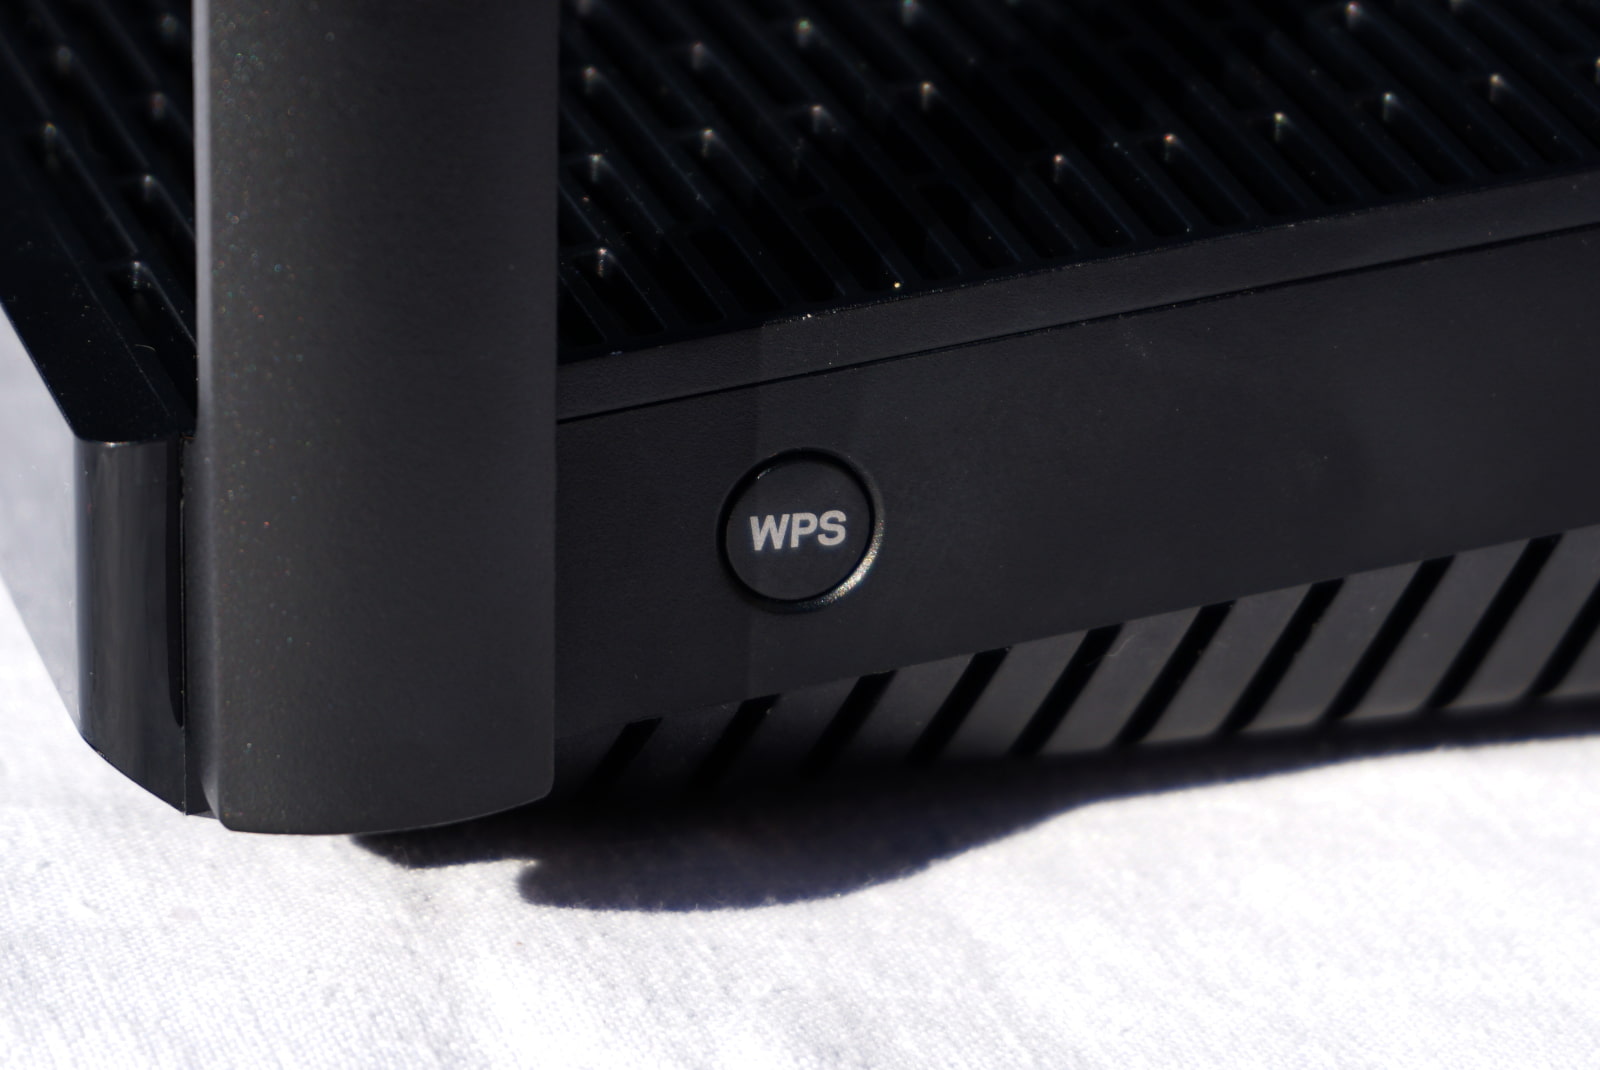 WPS button on the right side of Hydra Pro 6E router